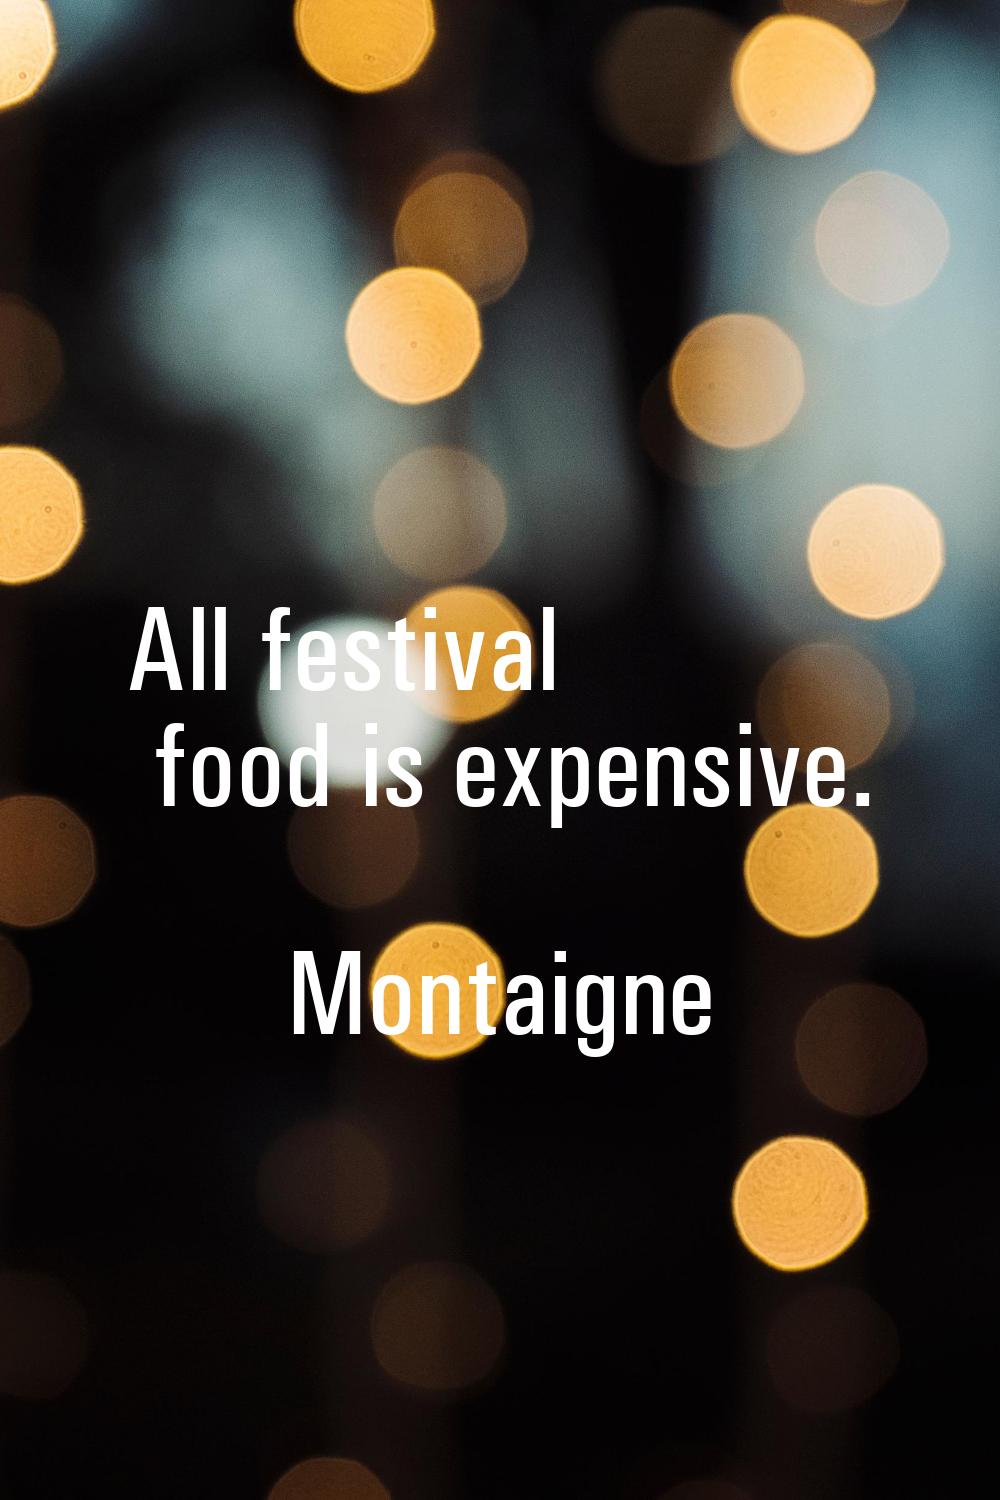 All festival food is expensive.